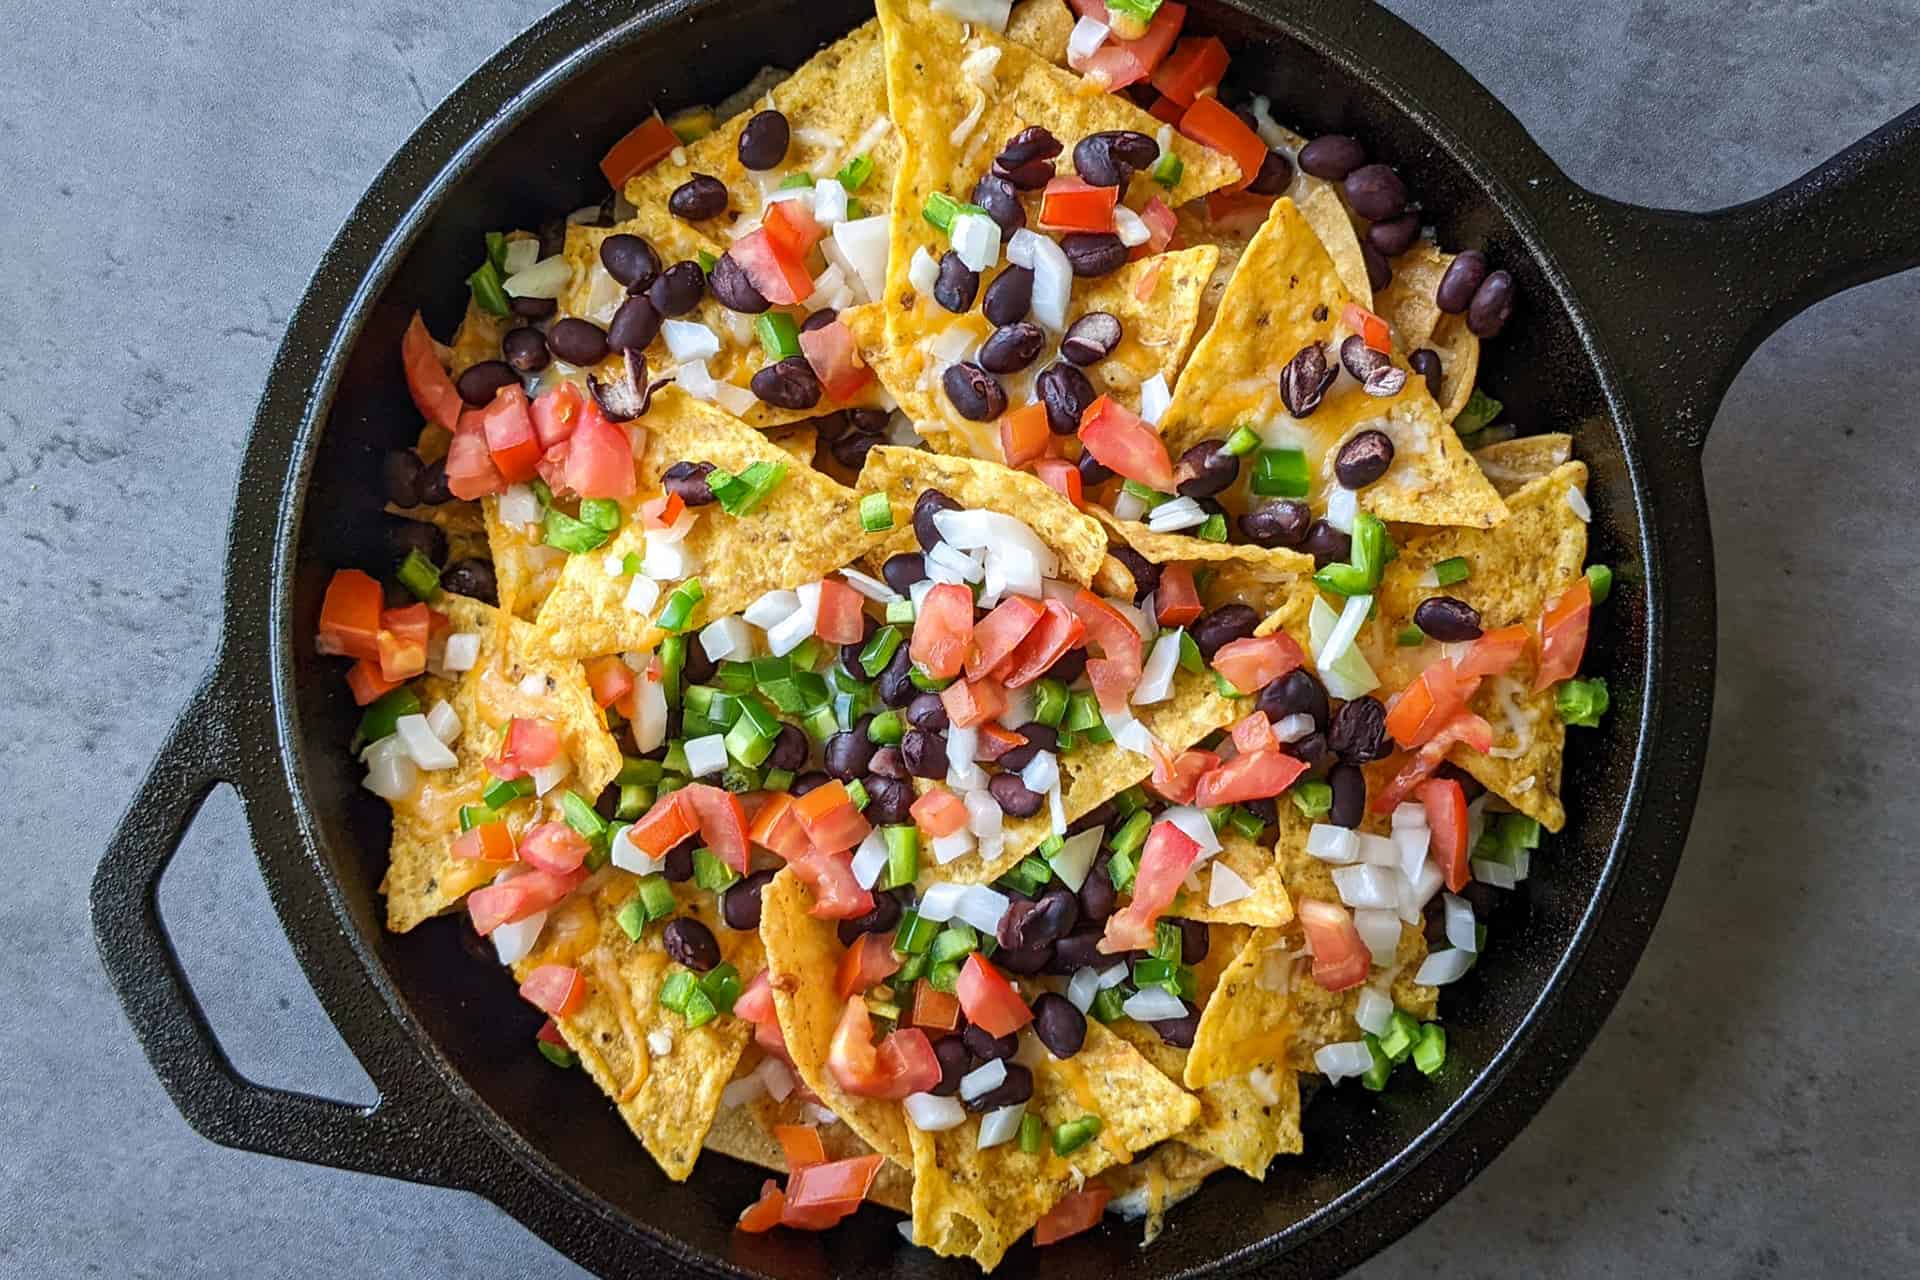 Nachos topped with cheese and fresh produce in a cast iron skillet